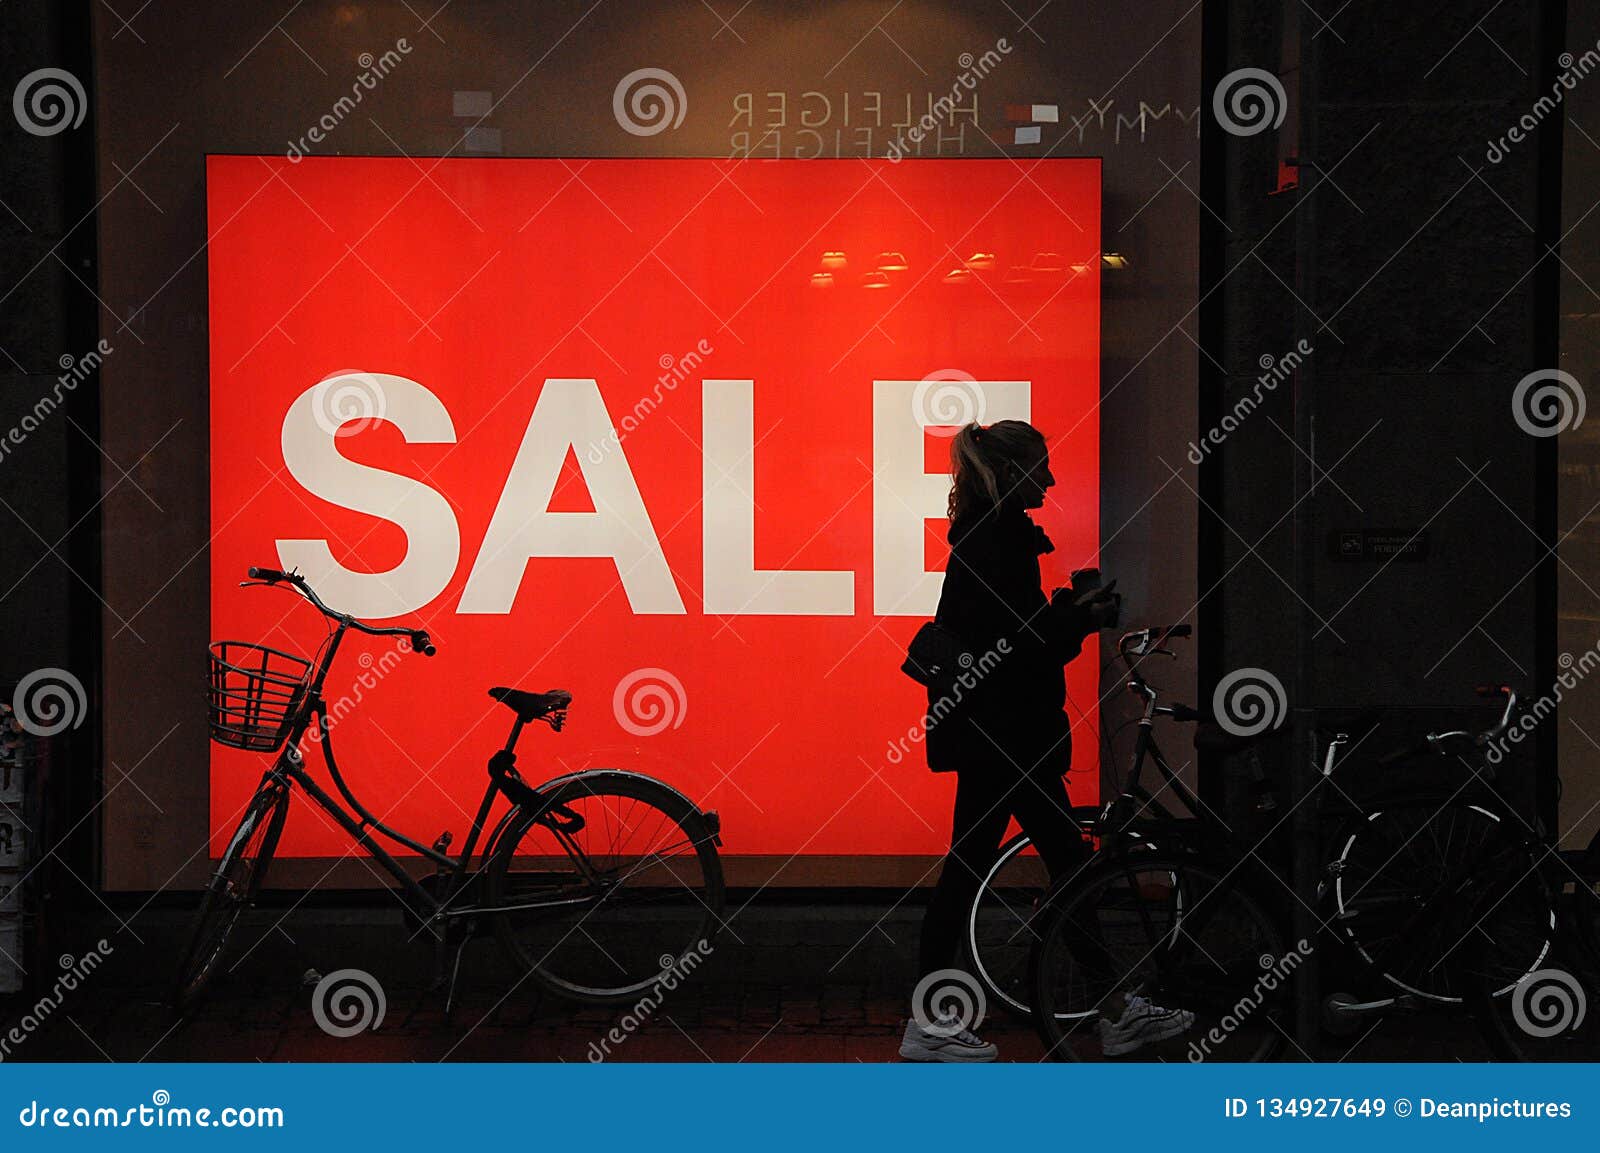 Swedish Retail H&M Sells 50 Disount Sale To Xmas Shoppers Editorial Stock  Image - Image of christmas, consumers: 134927649